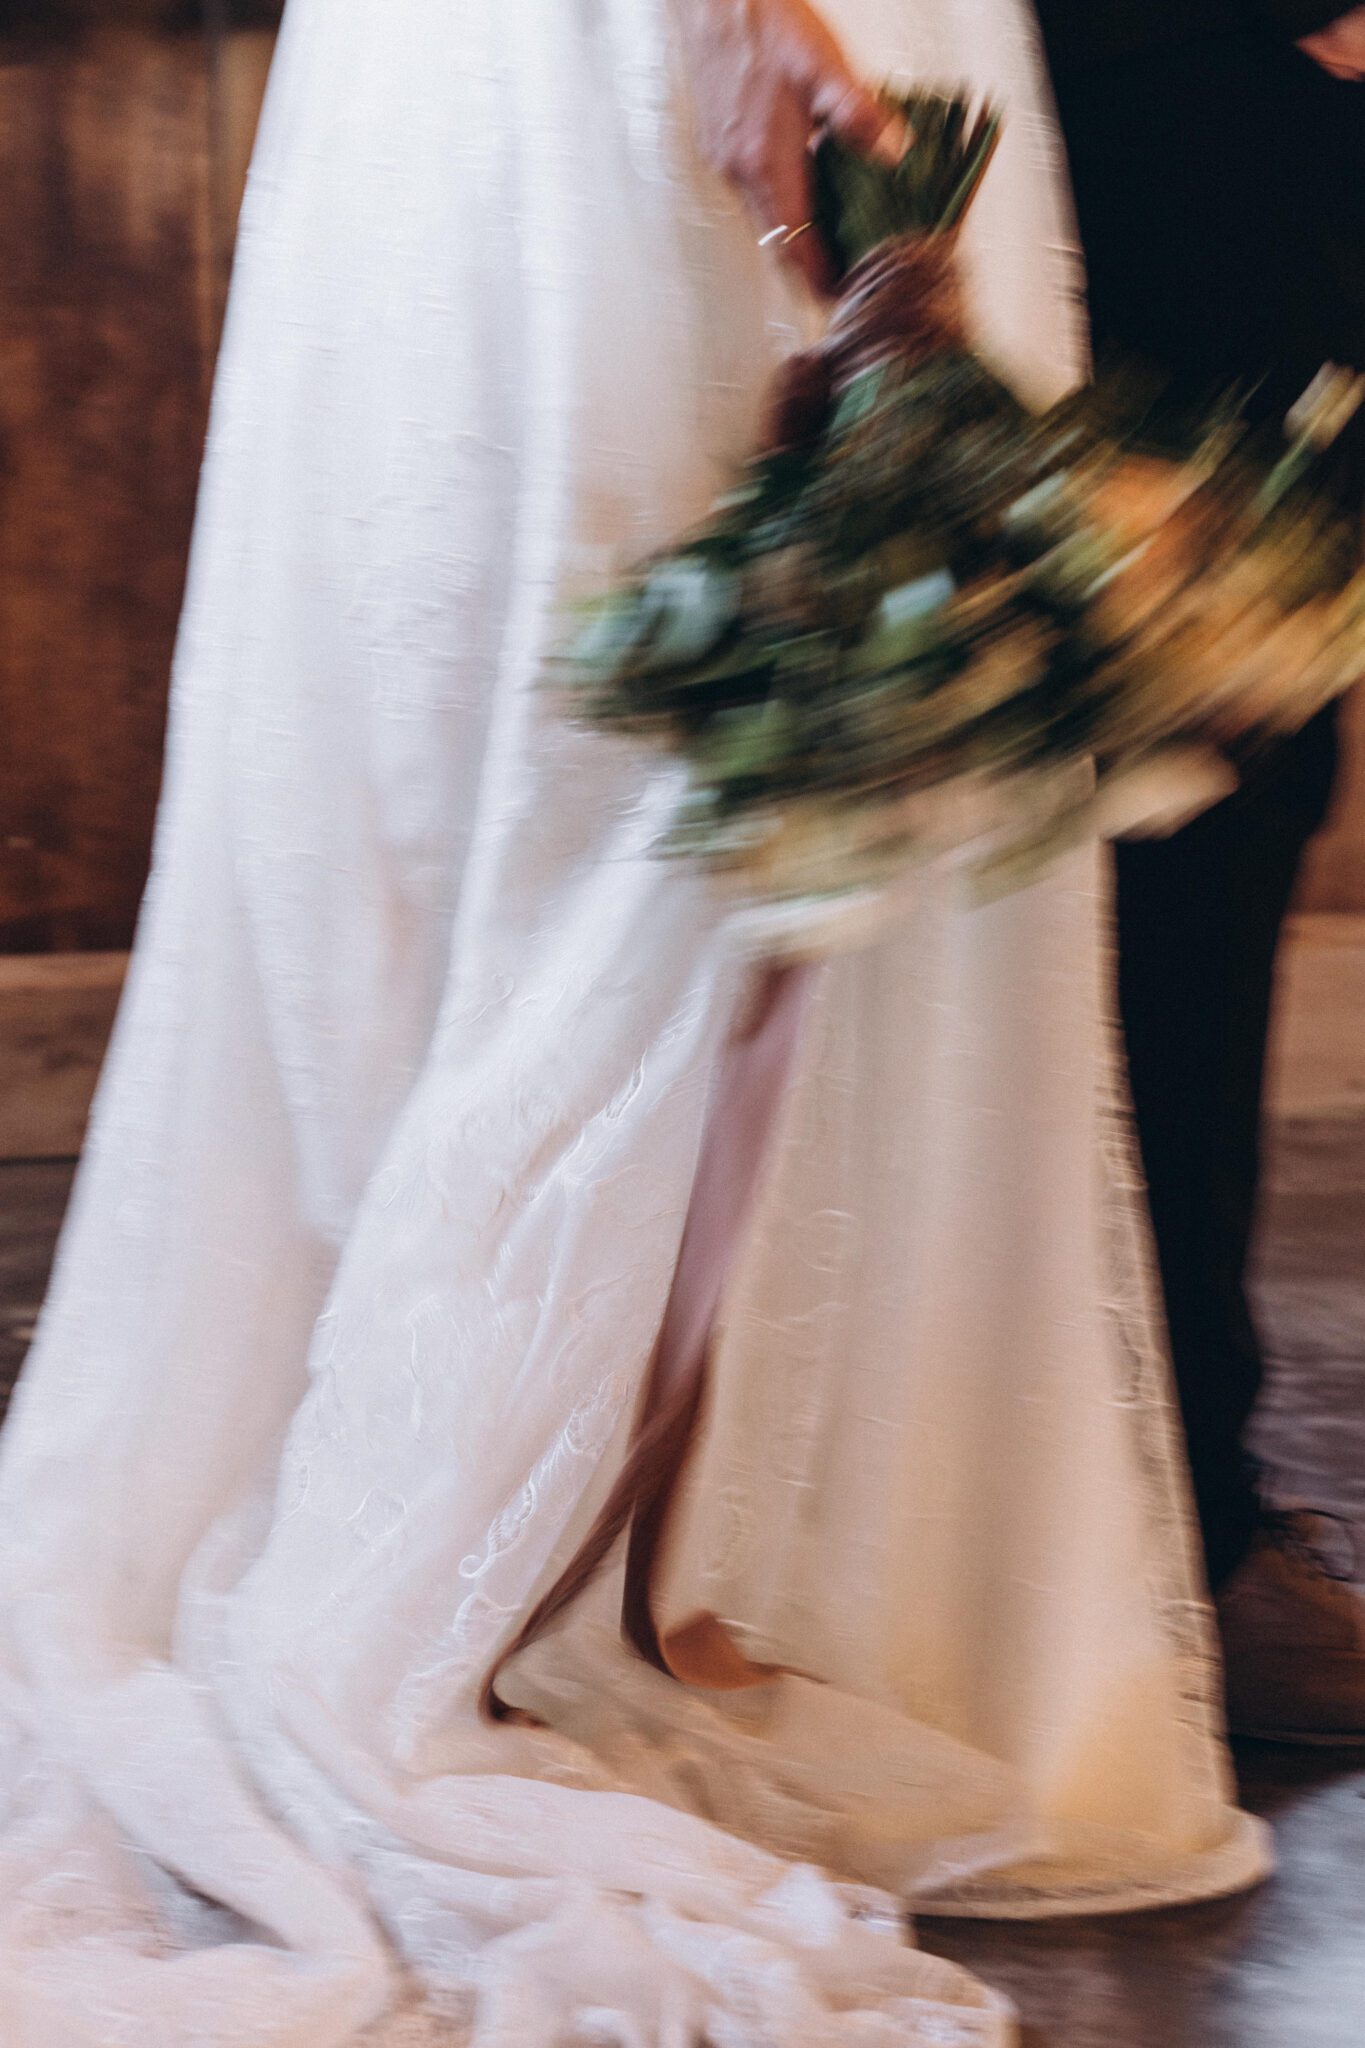 Wedding Inspiration With An Updated Take on Country Chic Wedding Style at Countryside Barn in Lethbridge Alberta, modern wedding photography style, blurred photography style of wedding bouquet